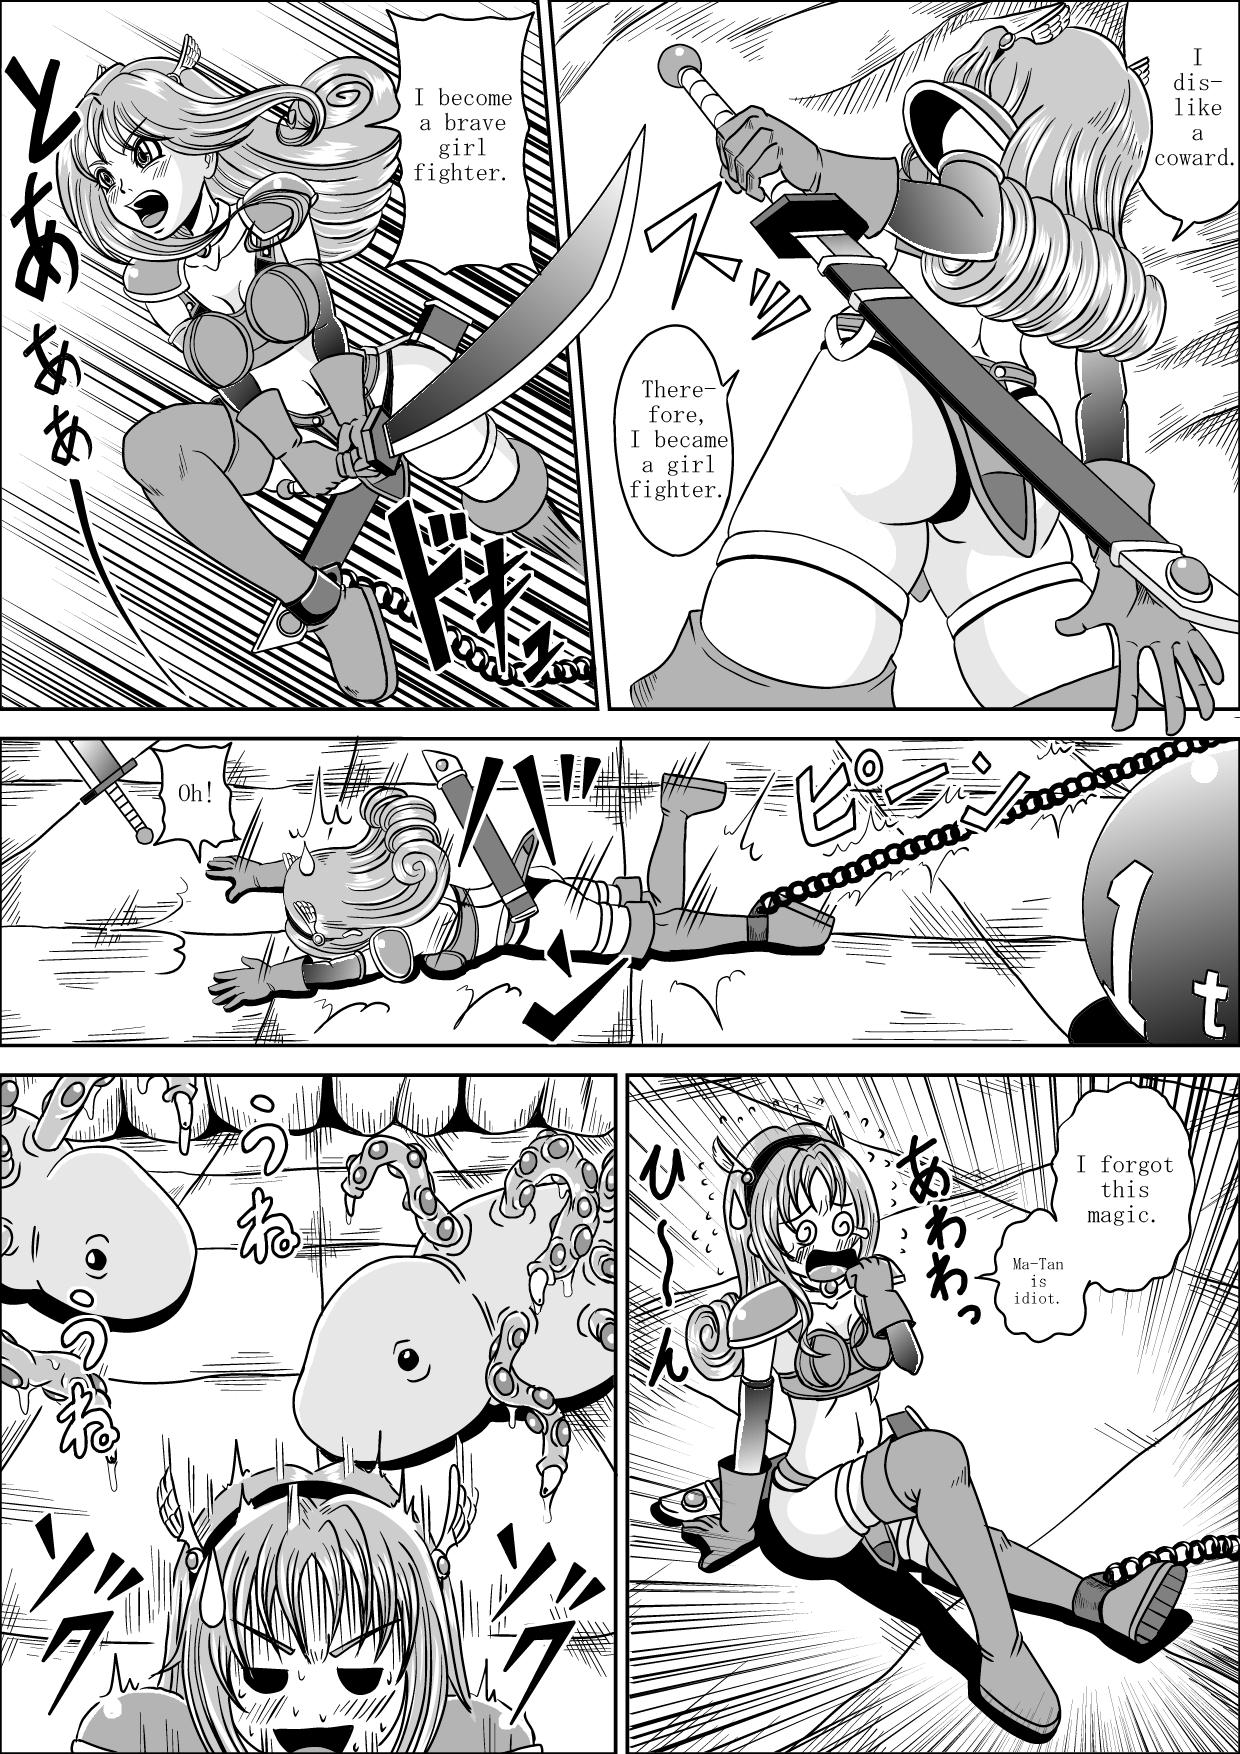 Doublepenetration A FAINTHEARTED GIRL FIGHTER CHI-CHAN'S ADVENTURE Village - Page 9